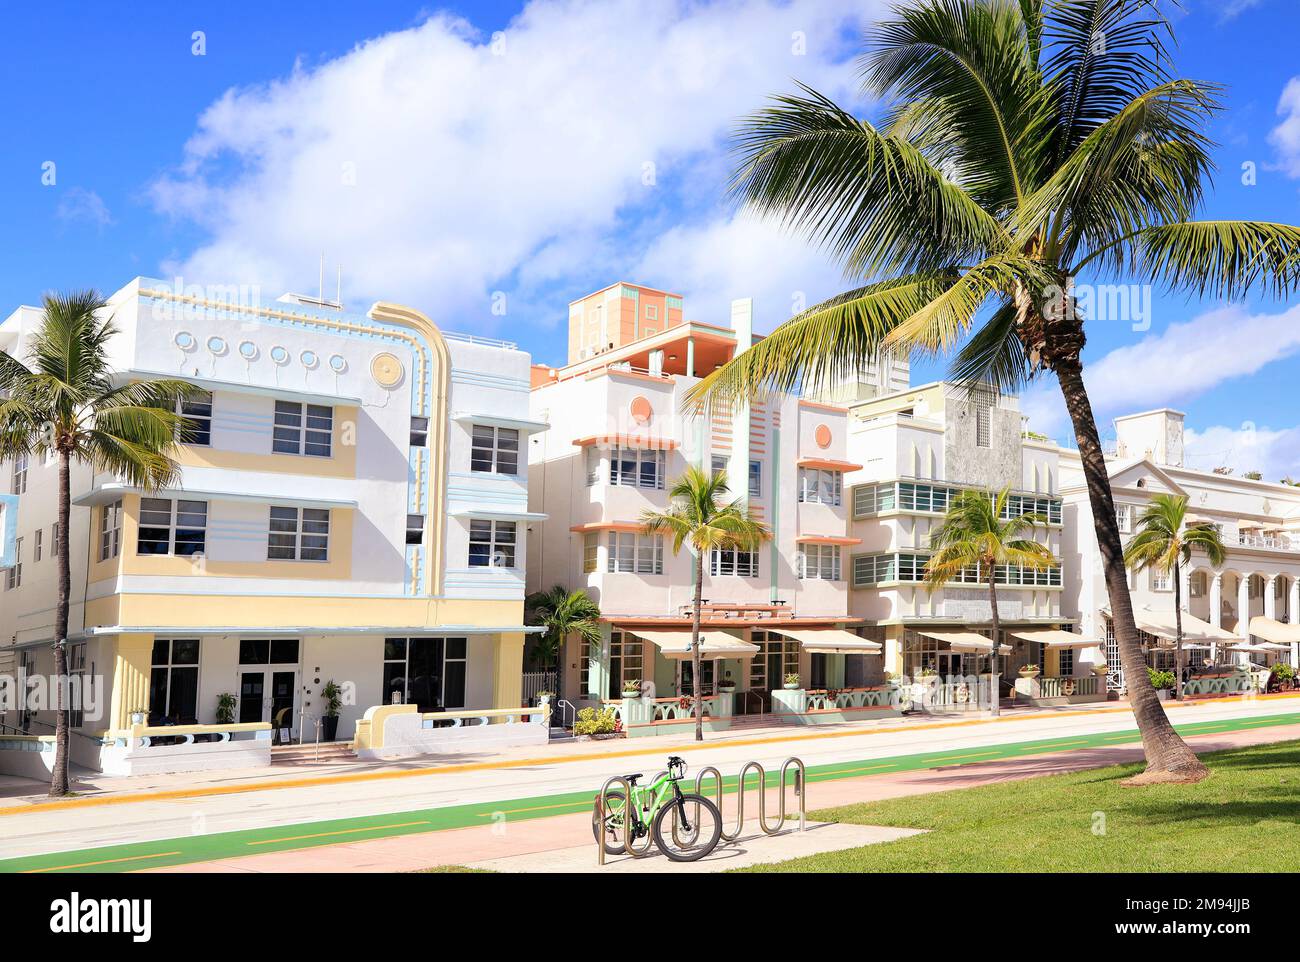 Art deco hotels and palm trees on Ocean Drive in Miami Beach, Florida, USA Stock Photo